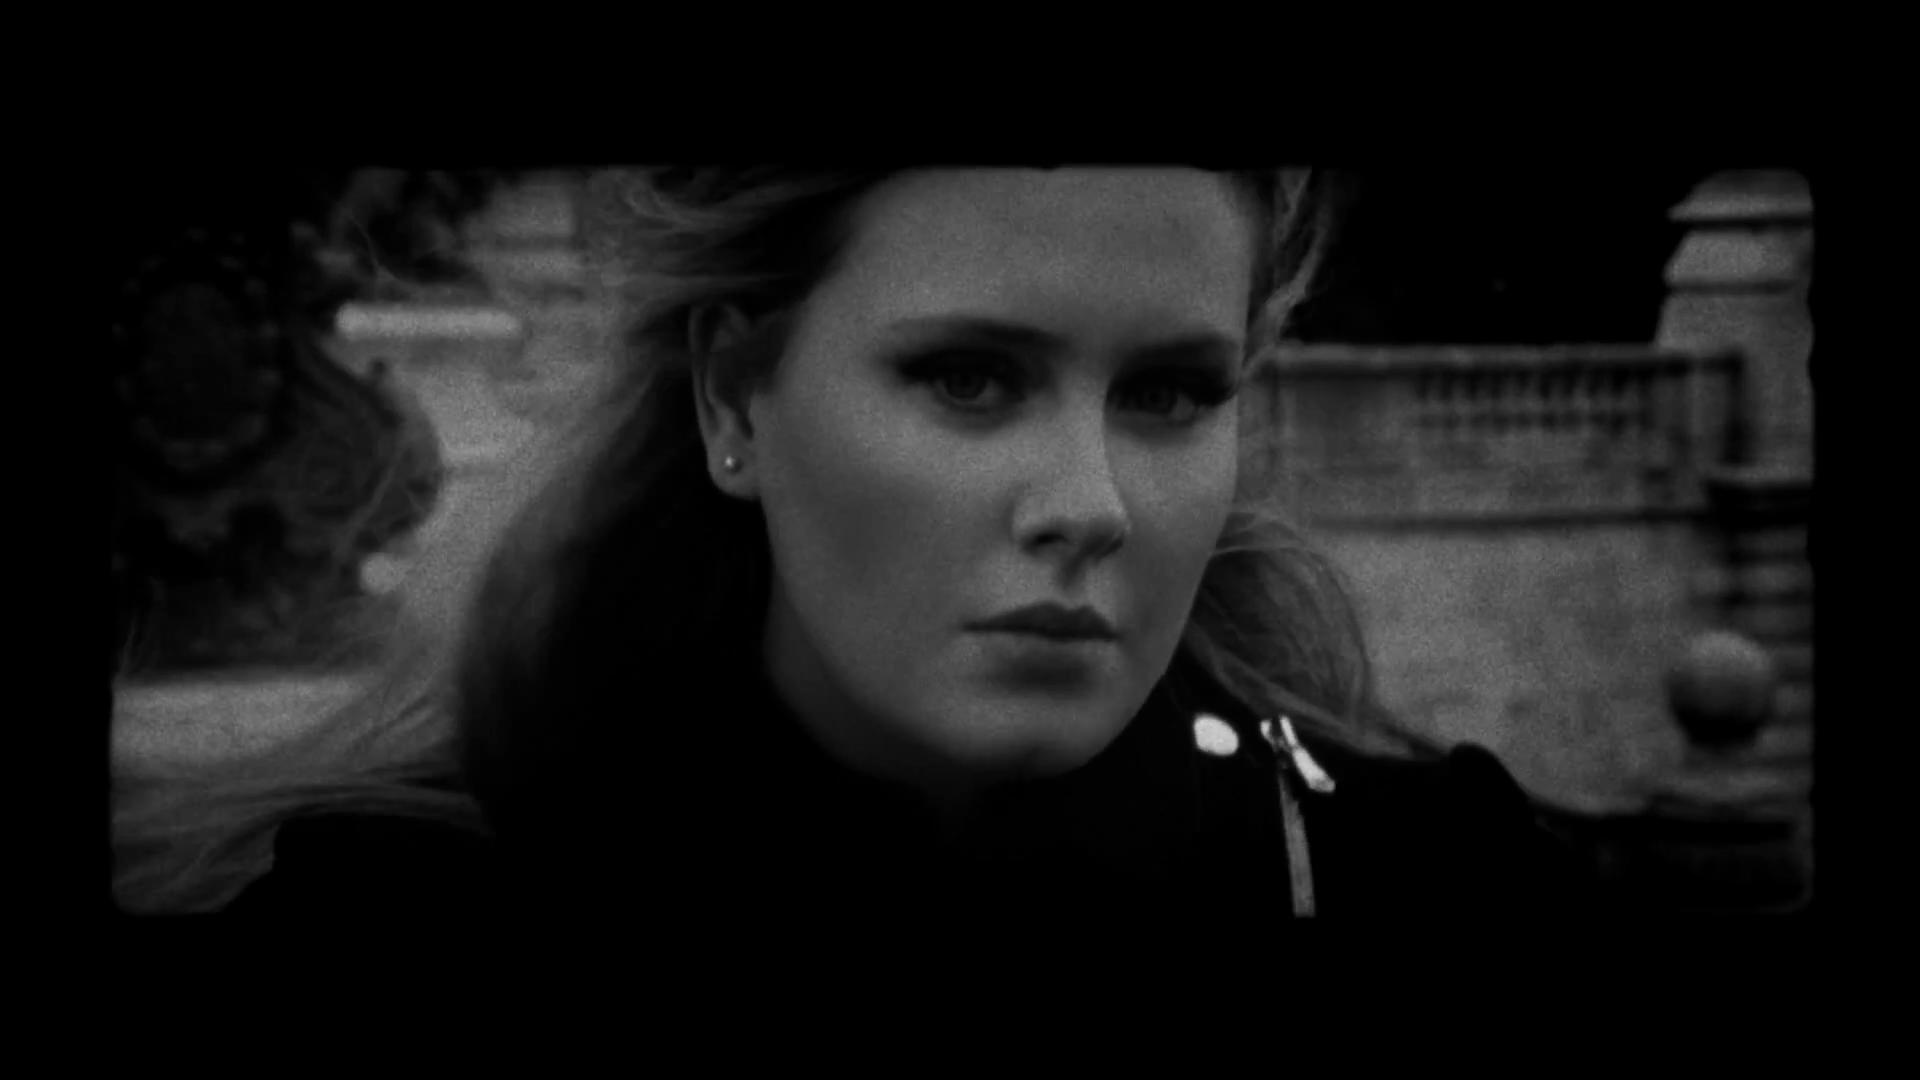 Observations on Adele’s “Someone Like You” music video. | The witty observations ...1920 x 1080